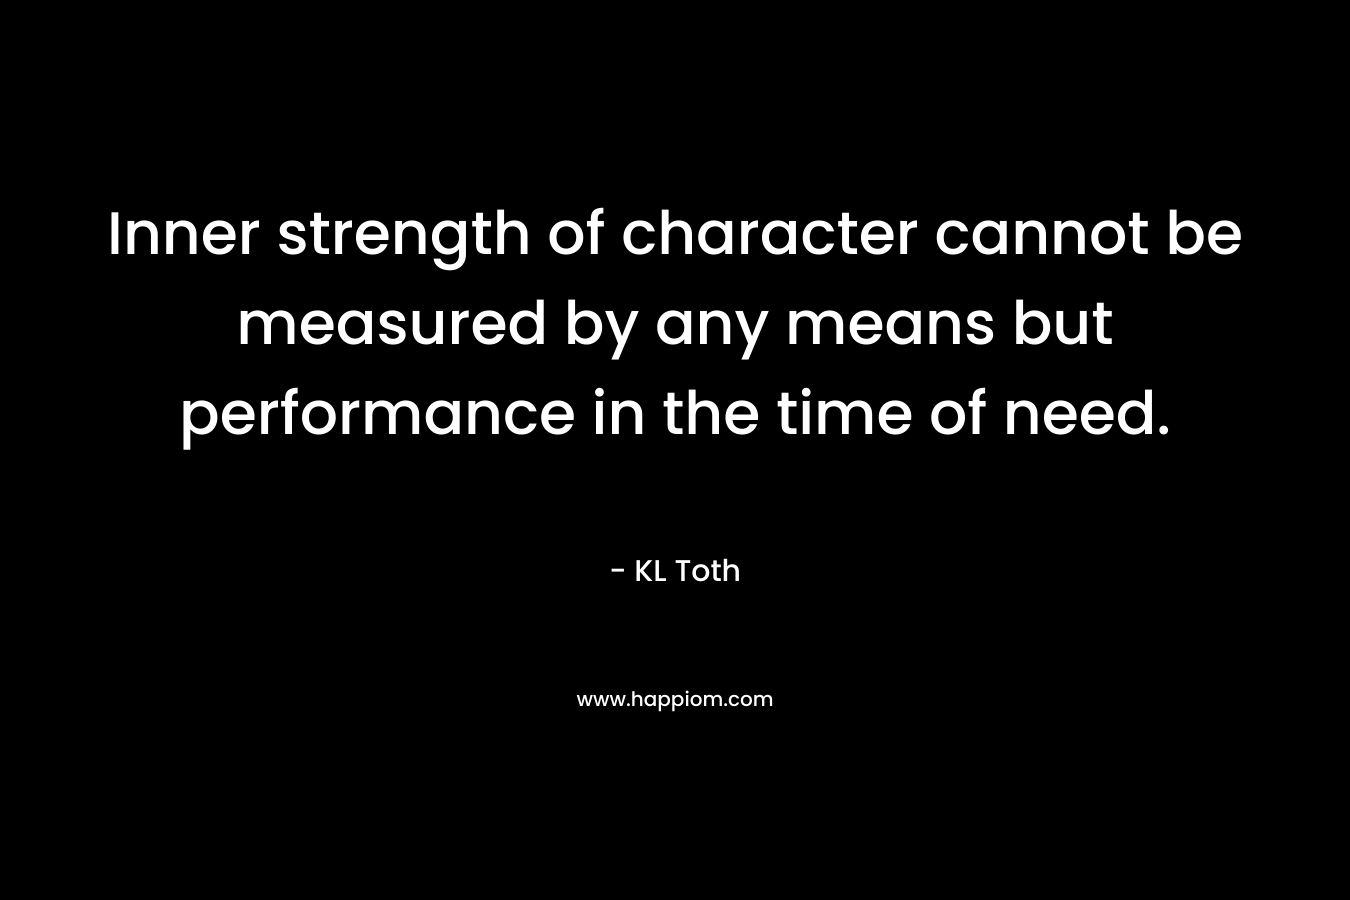 Inner strength of character cannot be measured by any means but performance in the time of need.